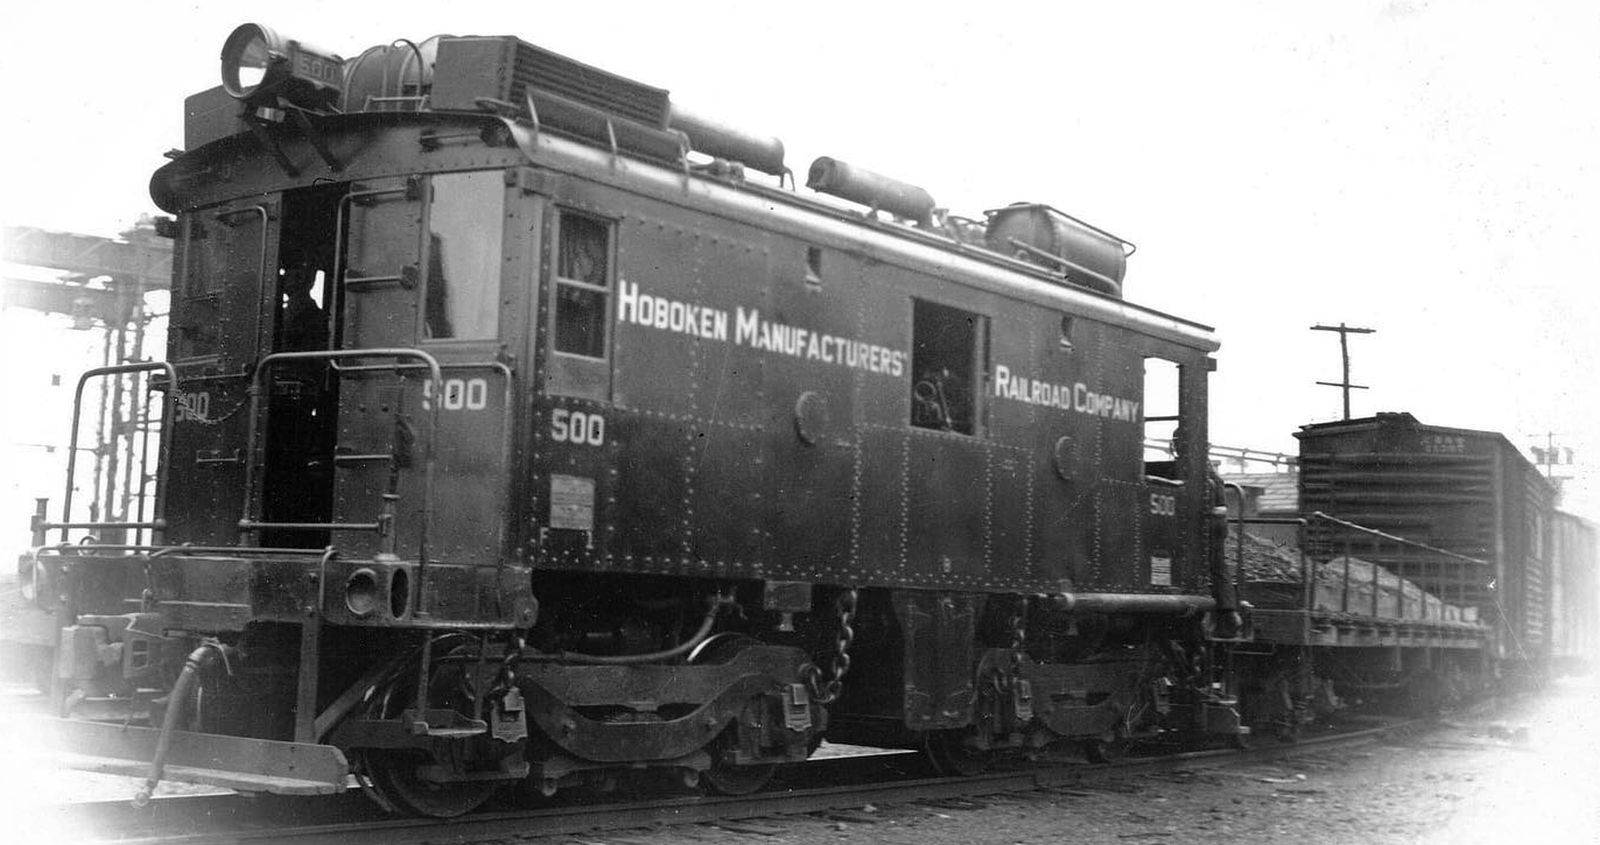 70-ton boxcab of the Hoboken Manufacturers Railroad Co. in June 1933 in Hoboken, New Jersey